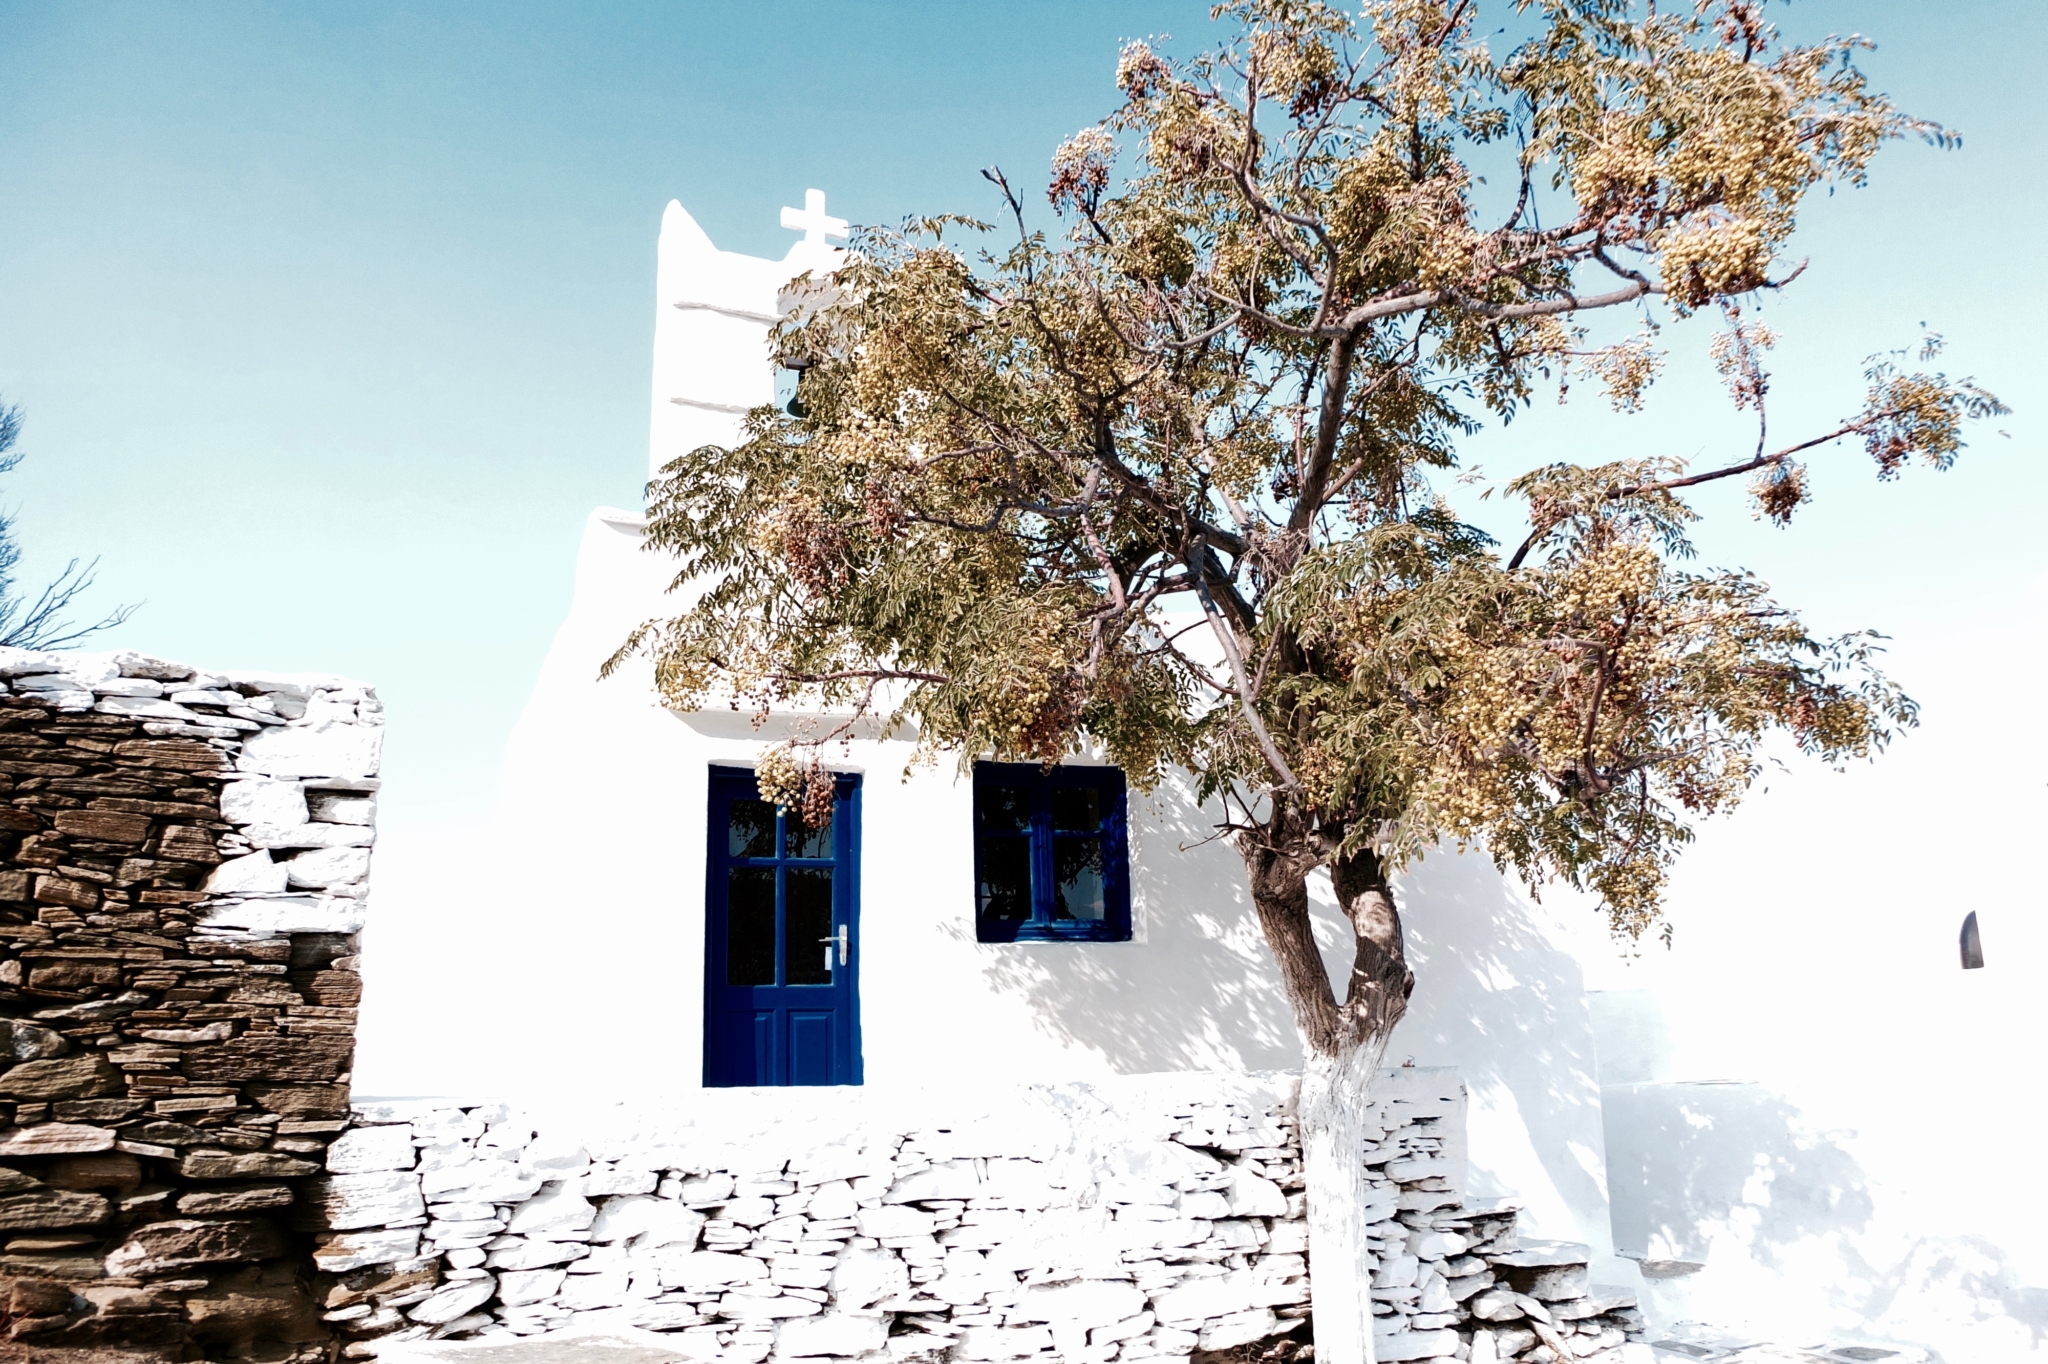 SEPTEMBER RETREAT TO THE BEAUTIFUL ISLAND OF SERIFOS – EMERGE: A FOOD, WRITING & CREATIVE ESCAPE TO THE MEDITERRANEAN…